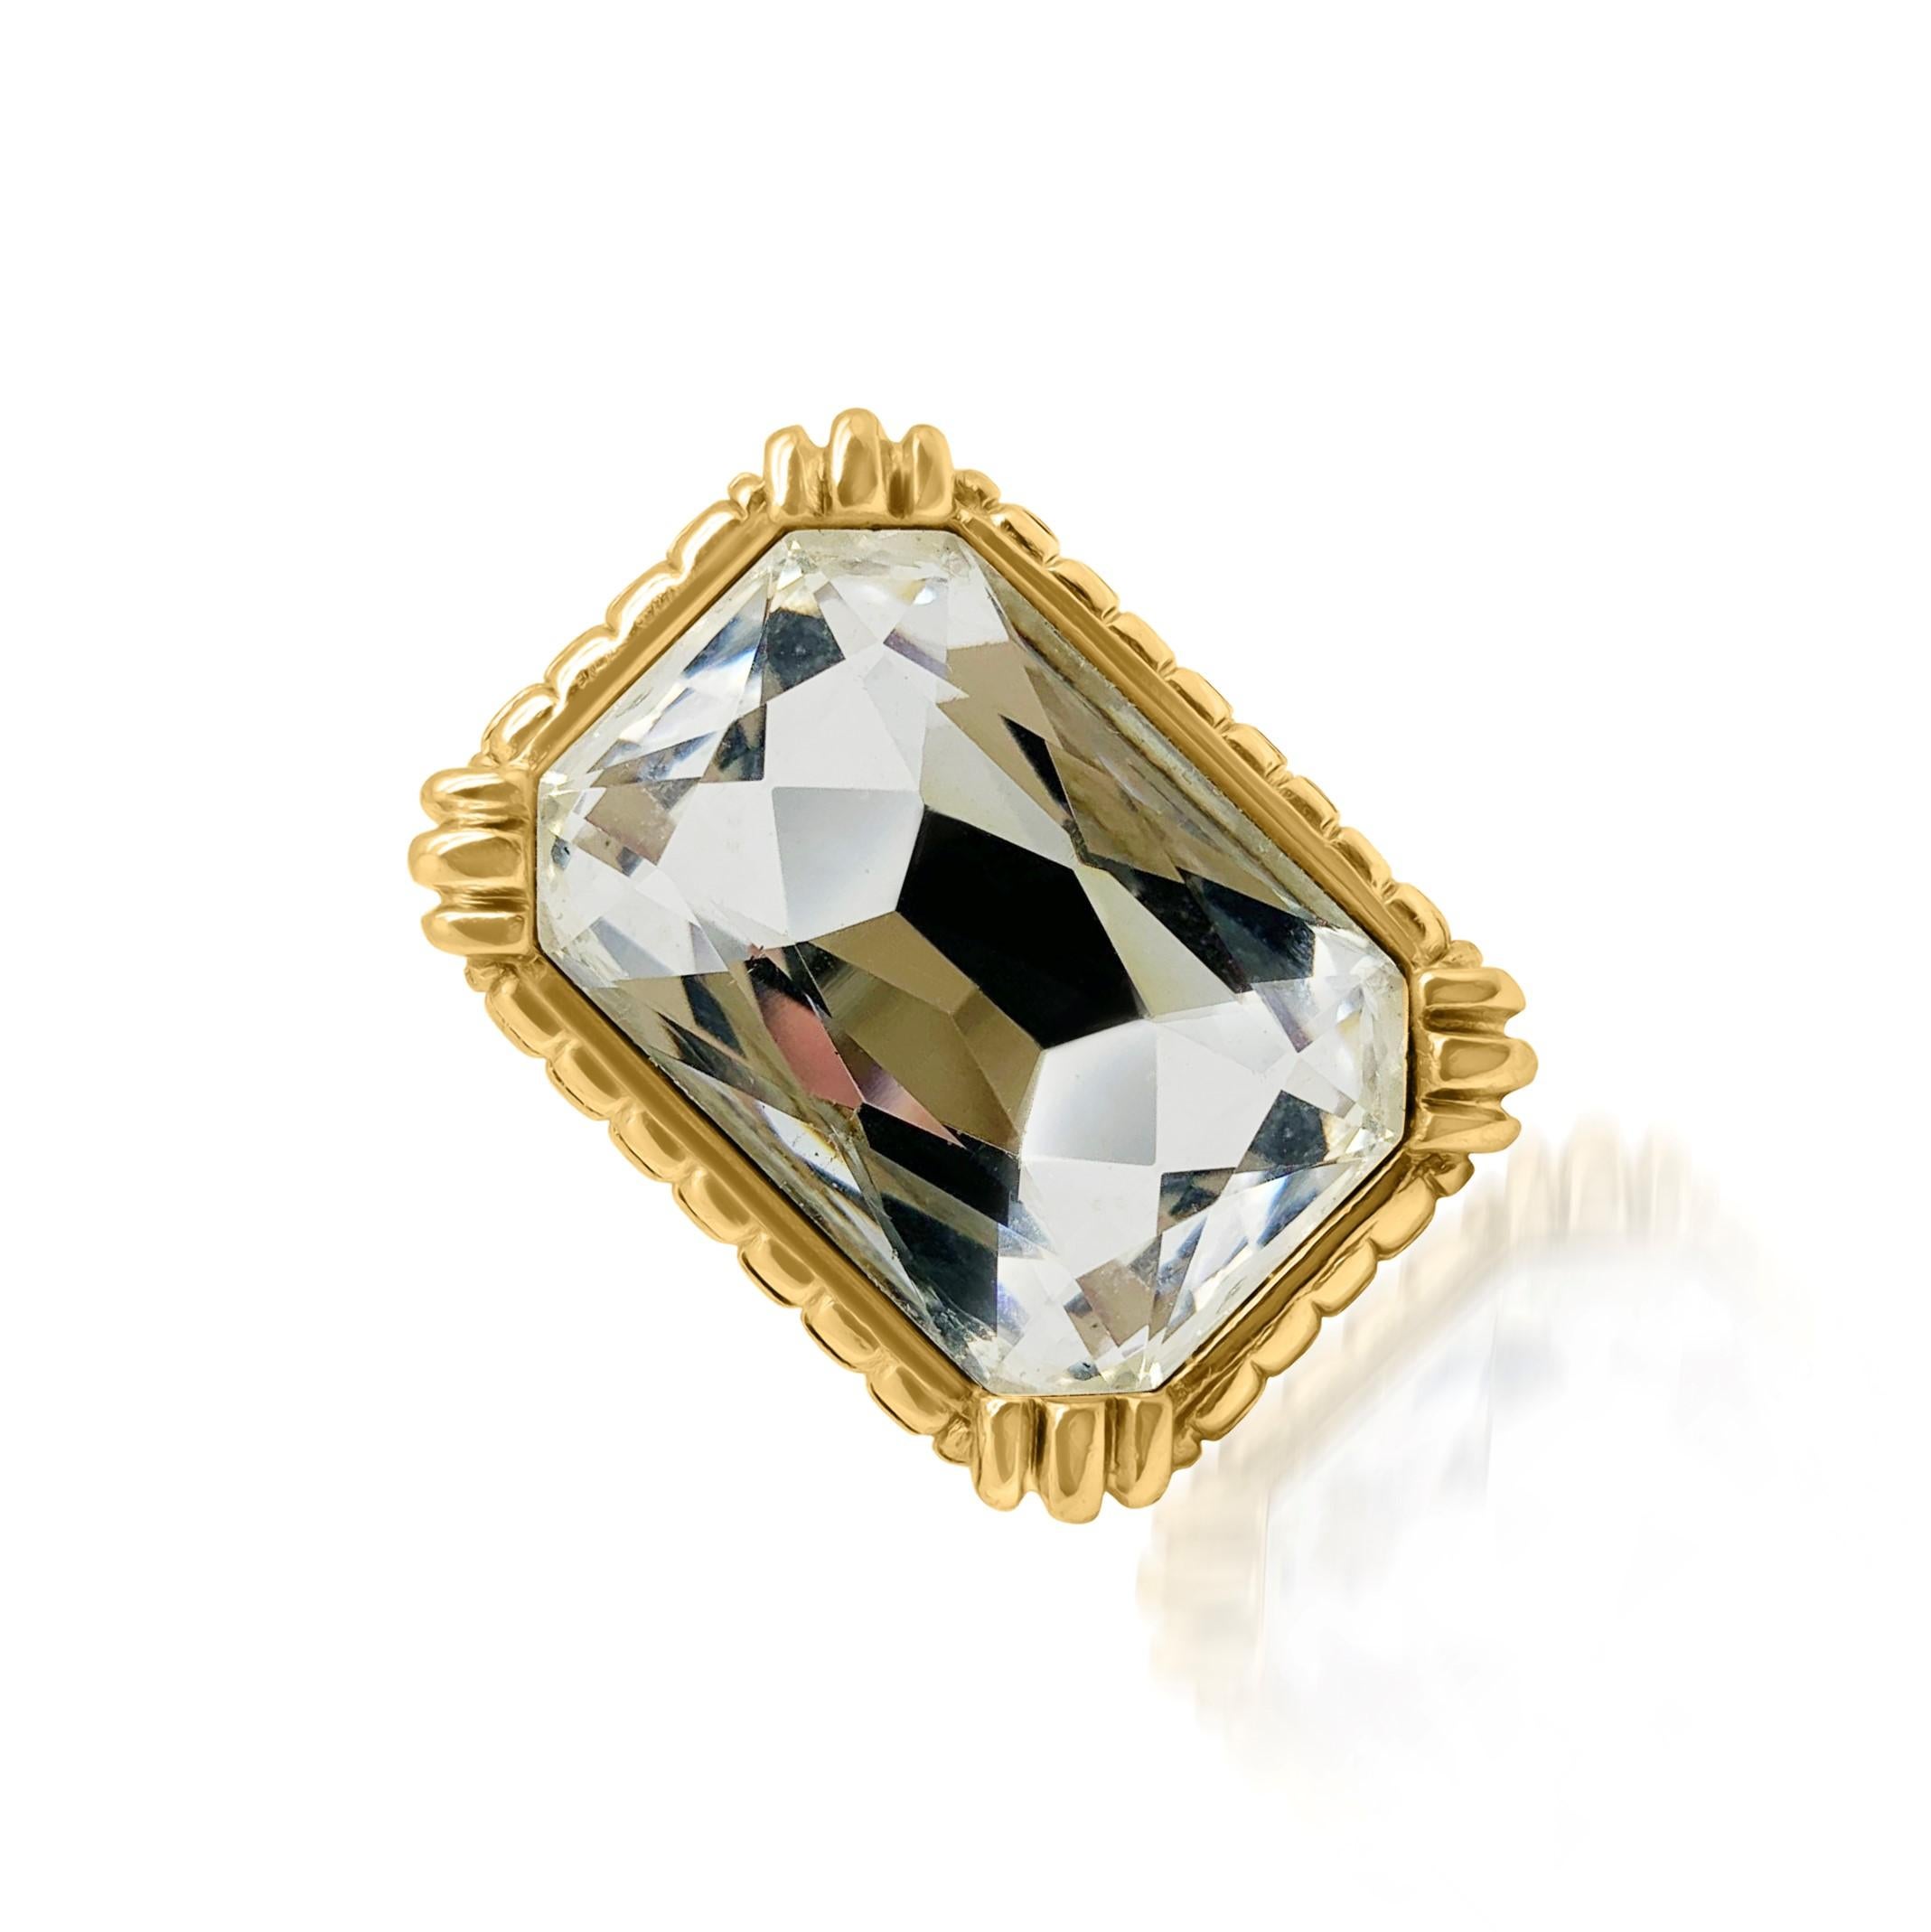 A spectacular Vintage Dior Crystal Ring. Crafted in gold plated metal and Swarovski crystal. Featuring a weighty gold plated high mount shank set with the most mesmerising and glamourous oversize crystal headlamp stone. In very good vintage